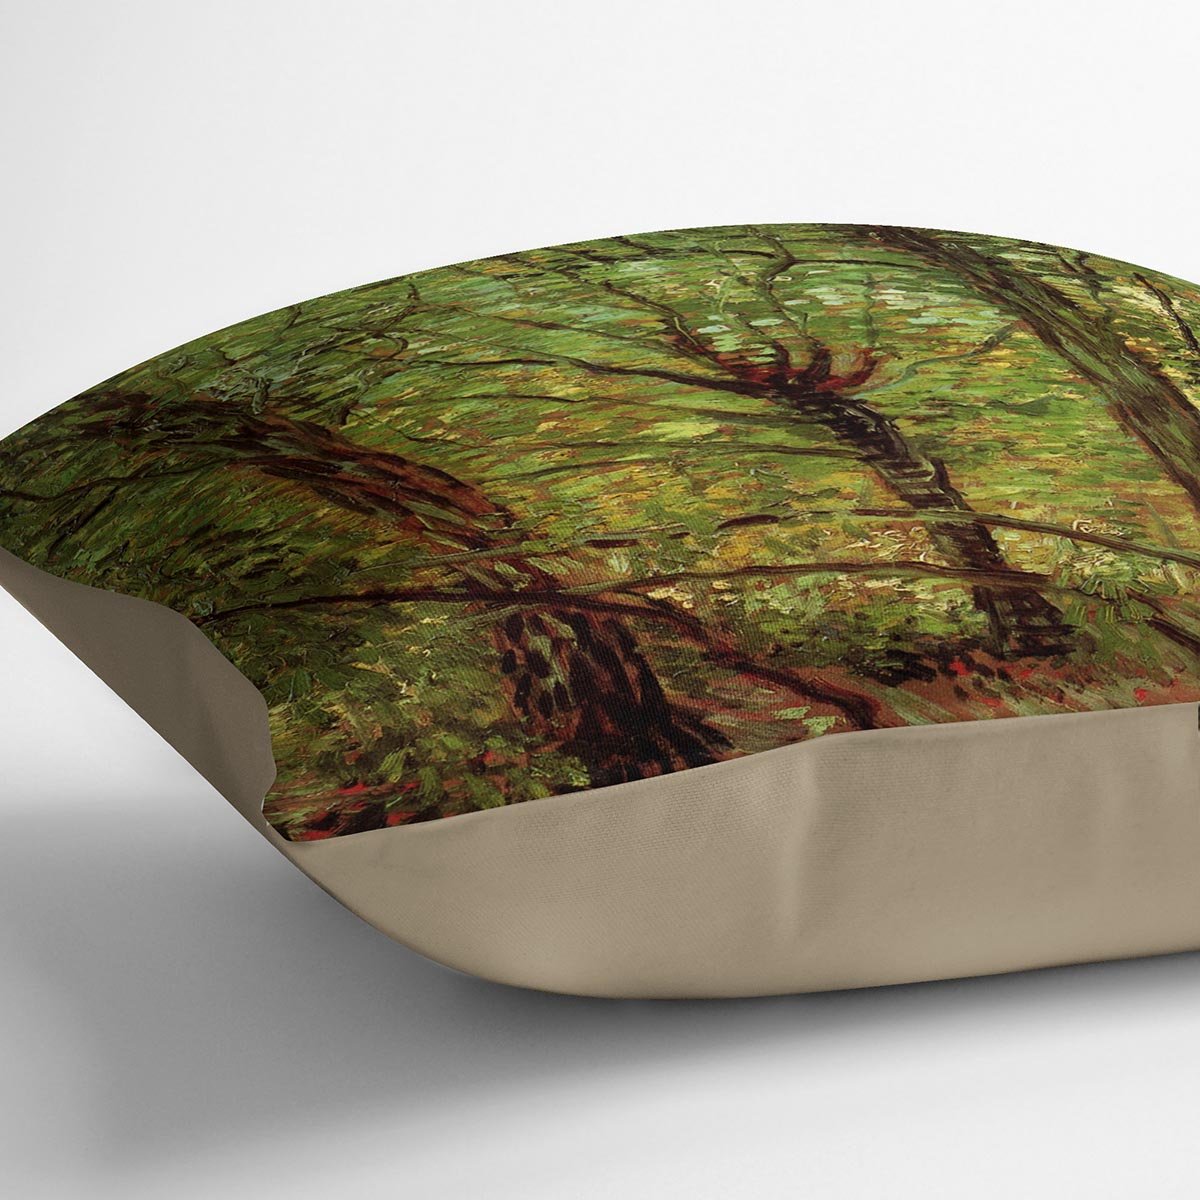 Trees and Undergrowth by Van Gogh Throw Pillow